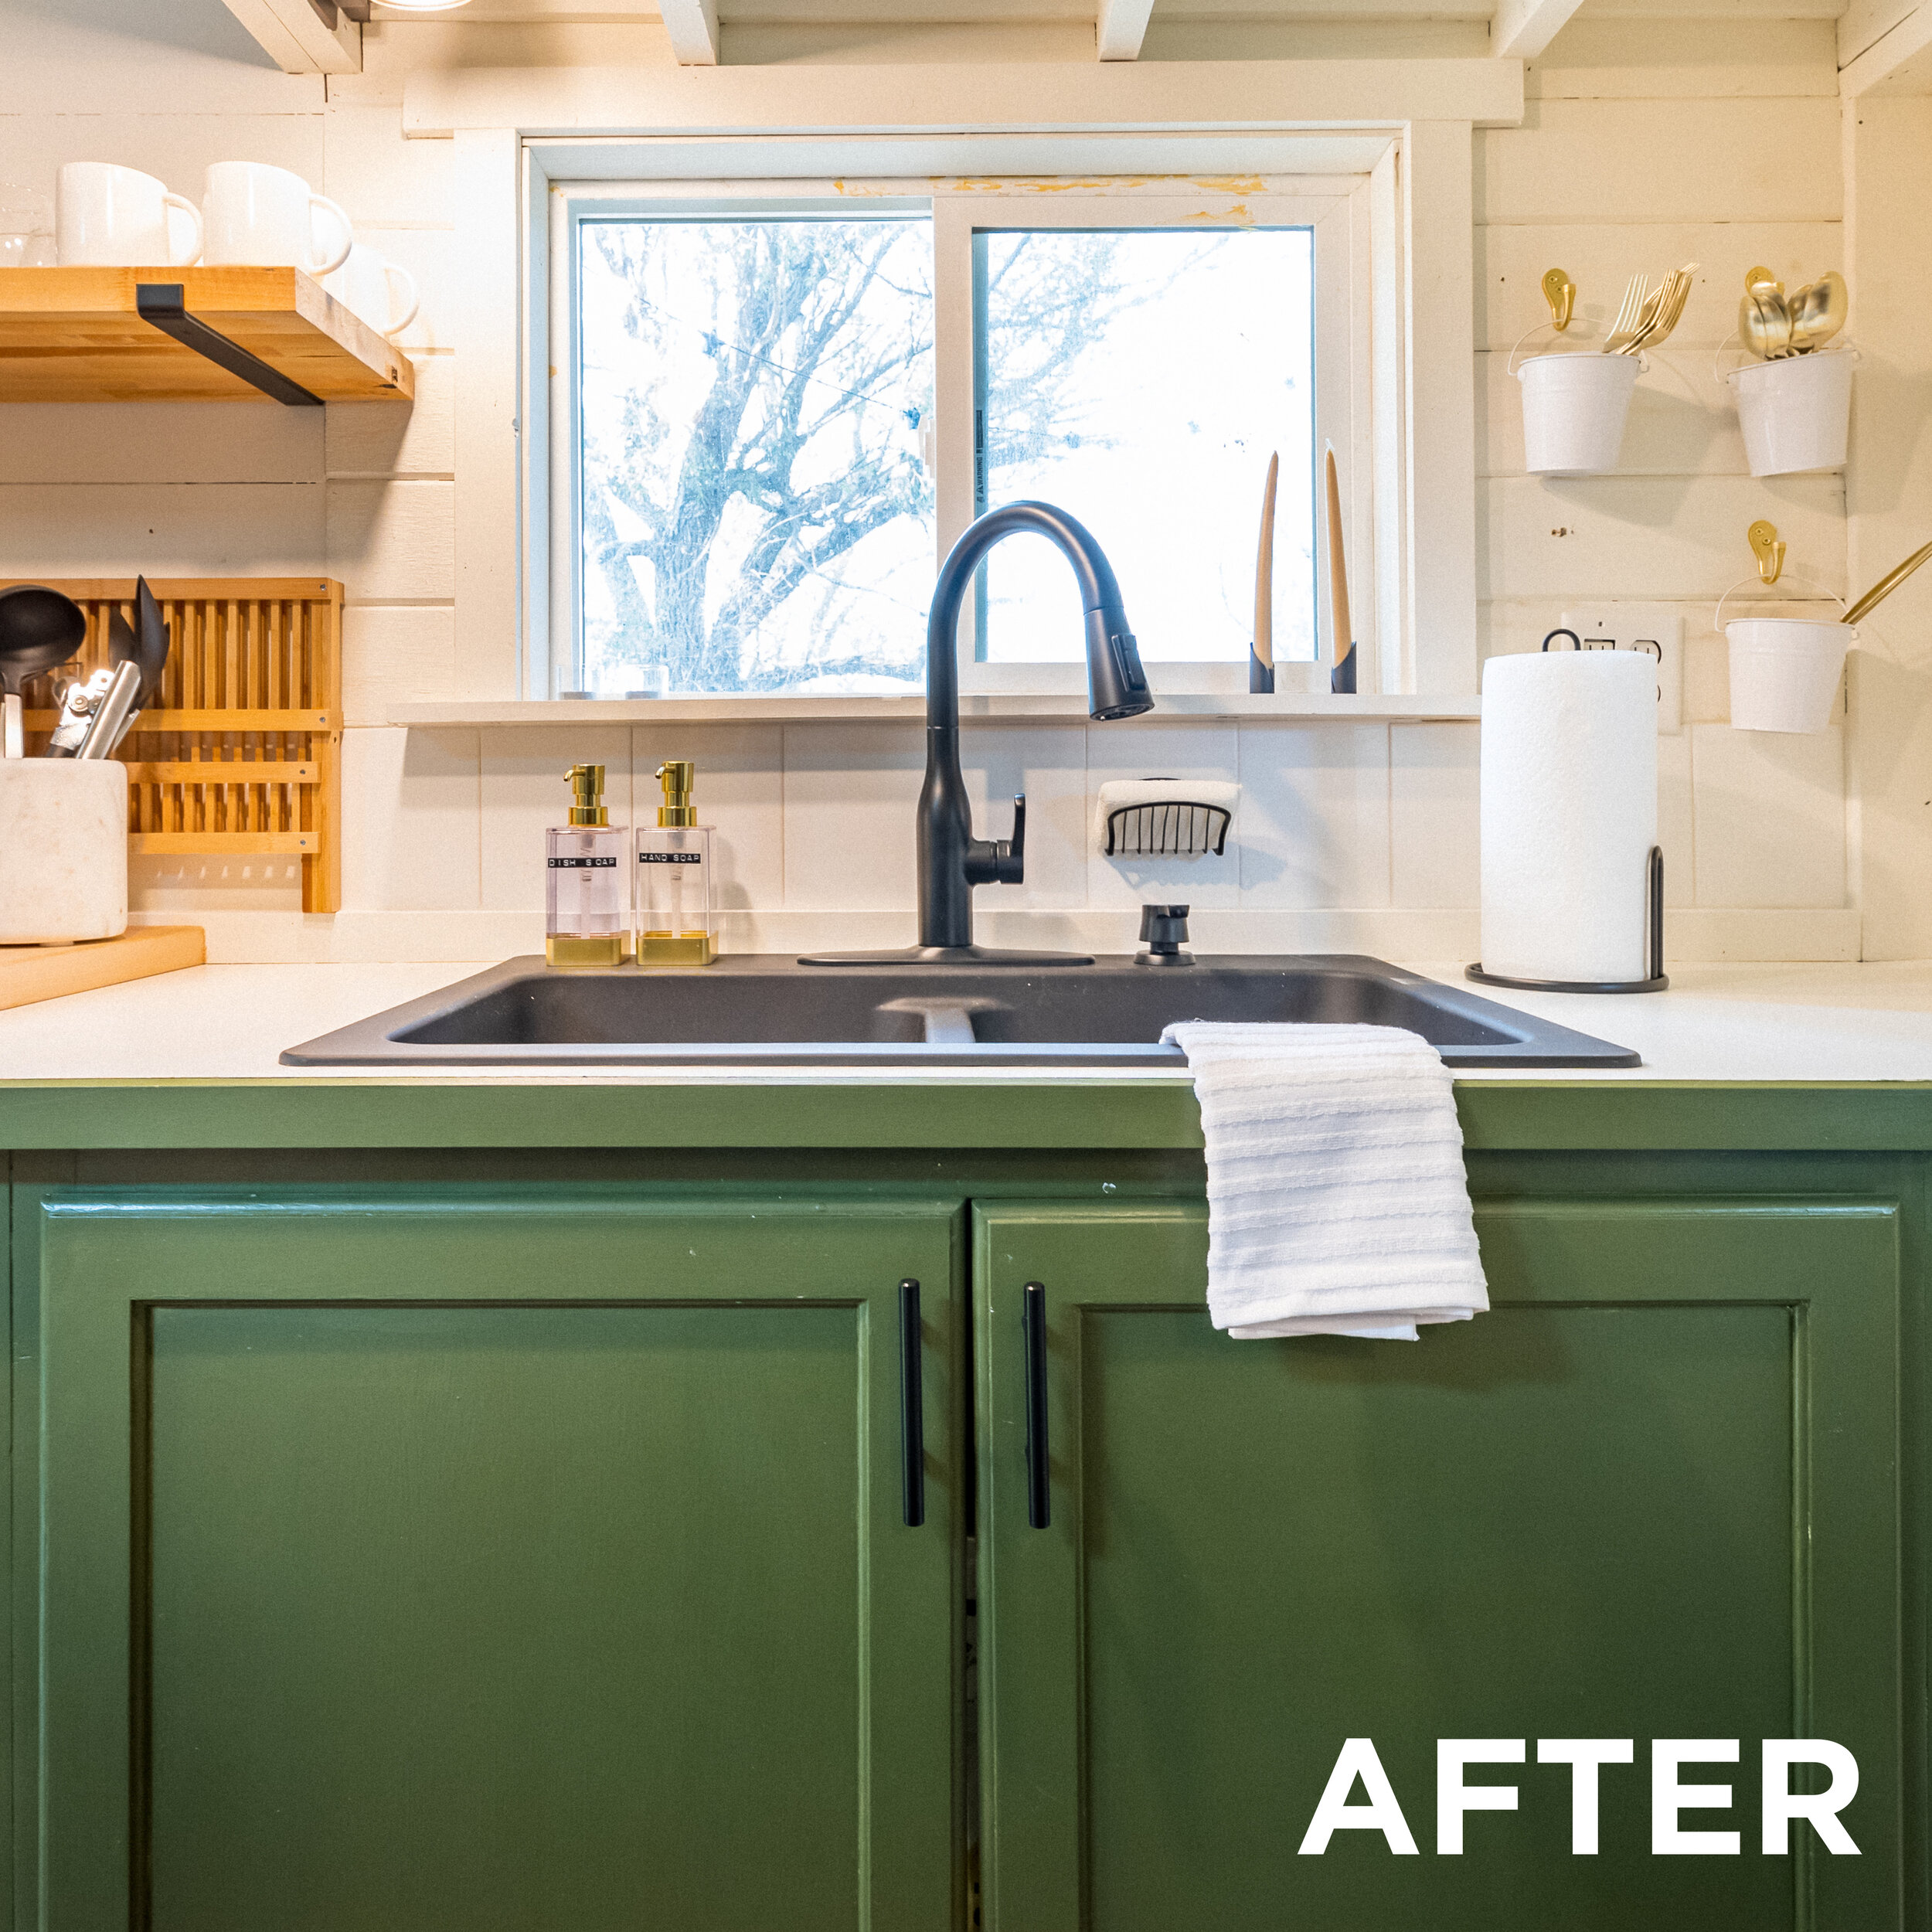 BEFORE & AFTER MARY TINY HOUSE4.jpg